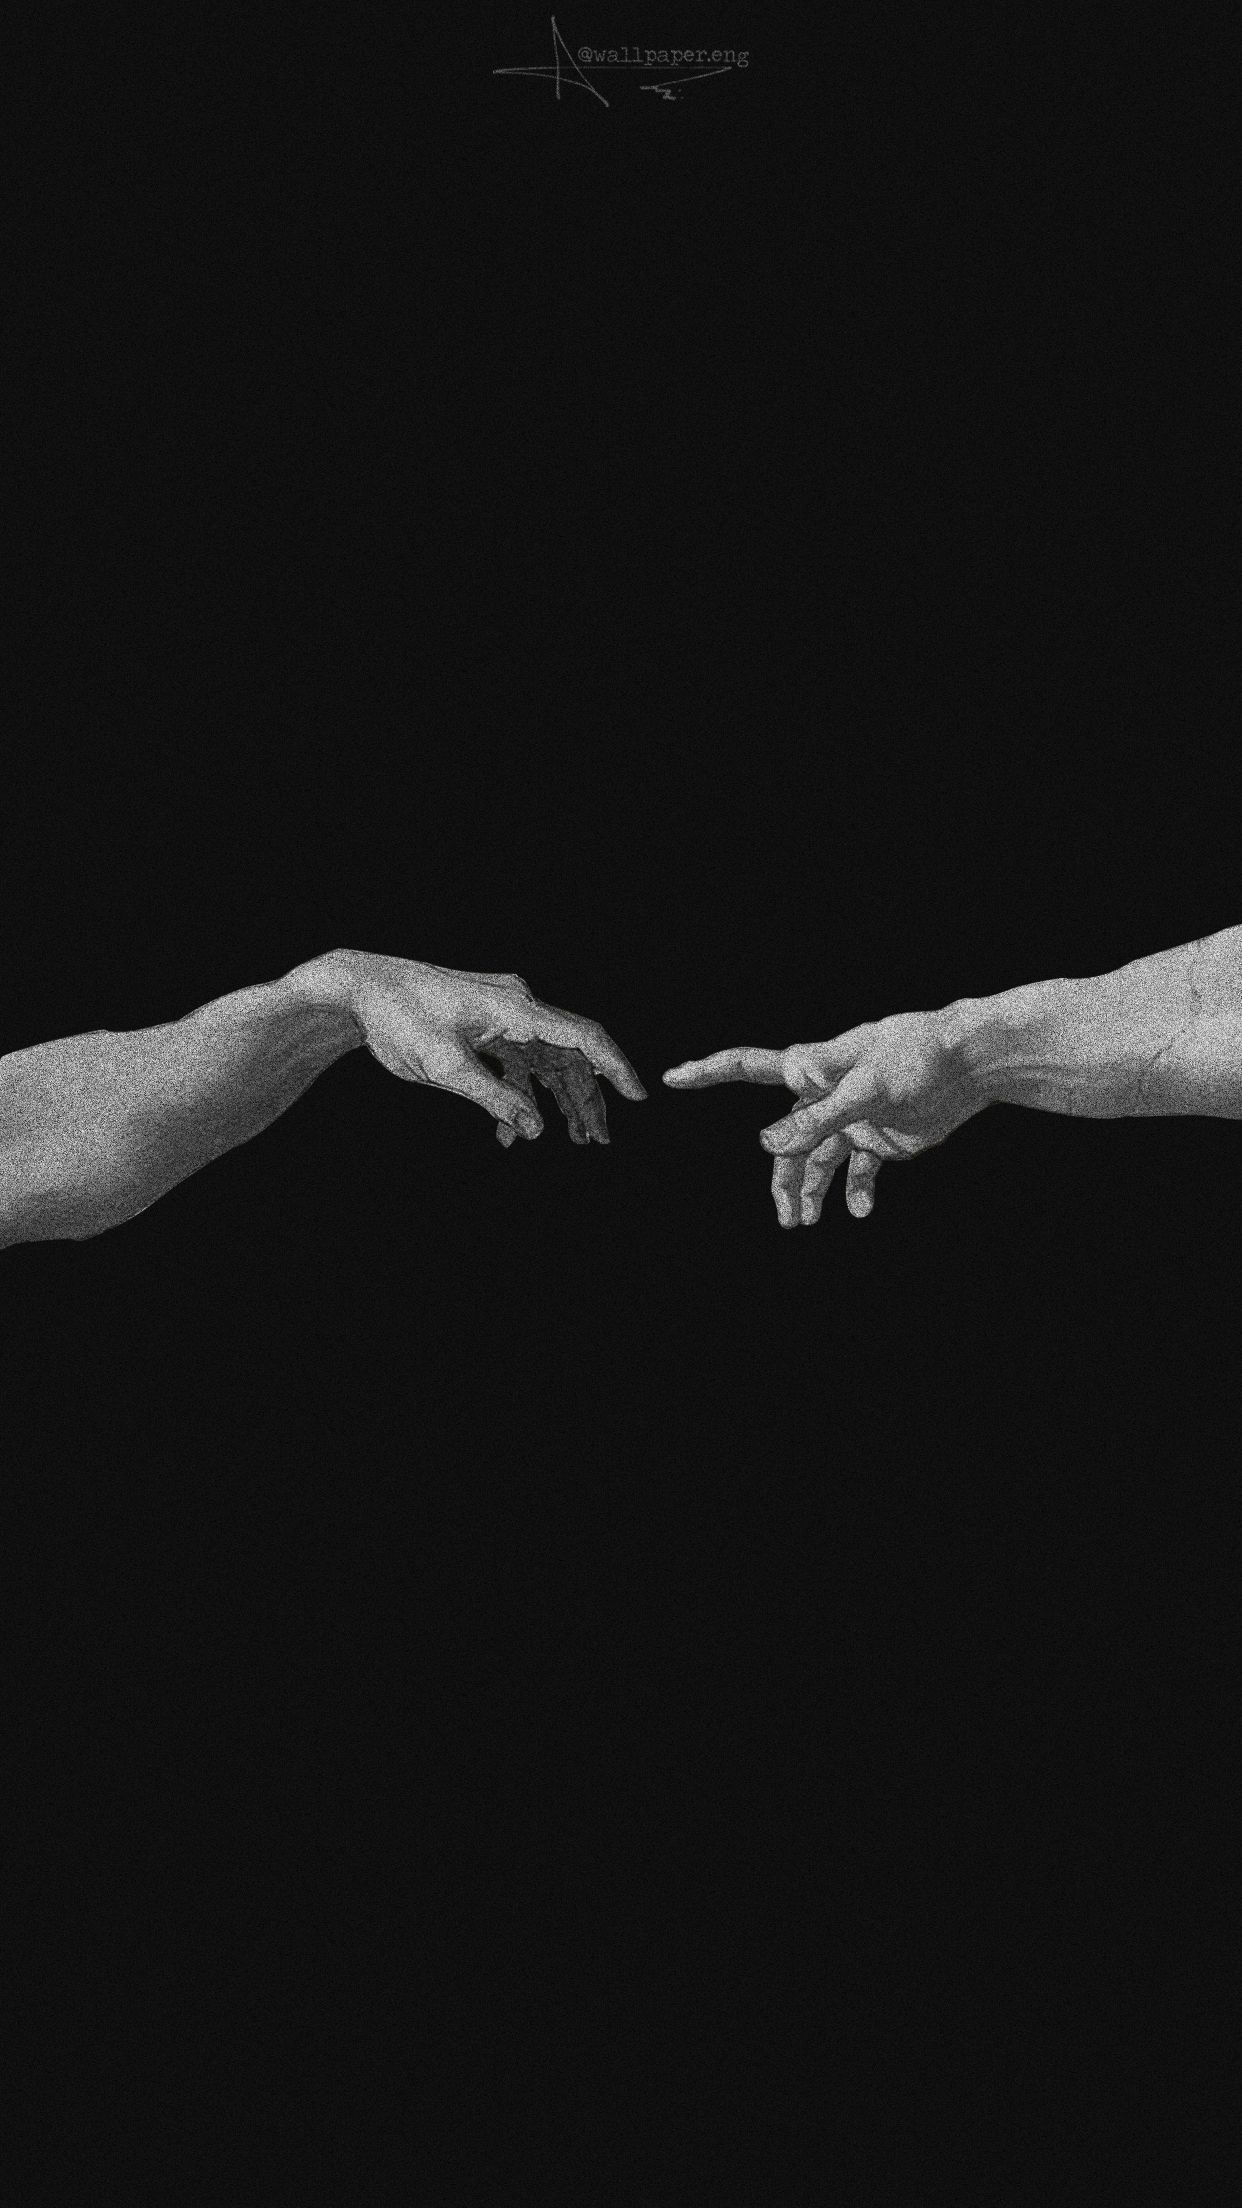 A black and white photograph of two hands reaching out - Black and white